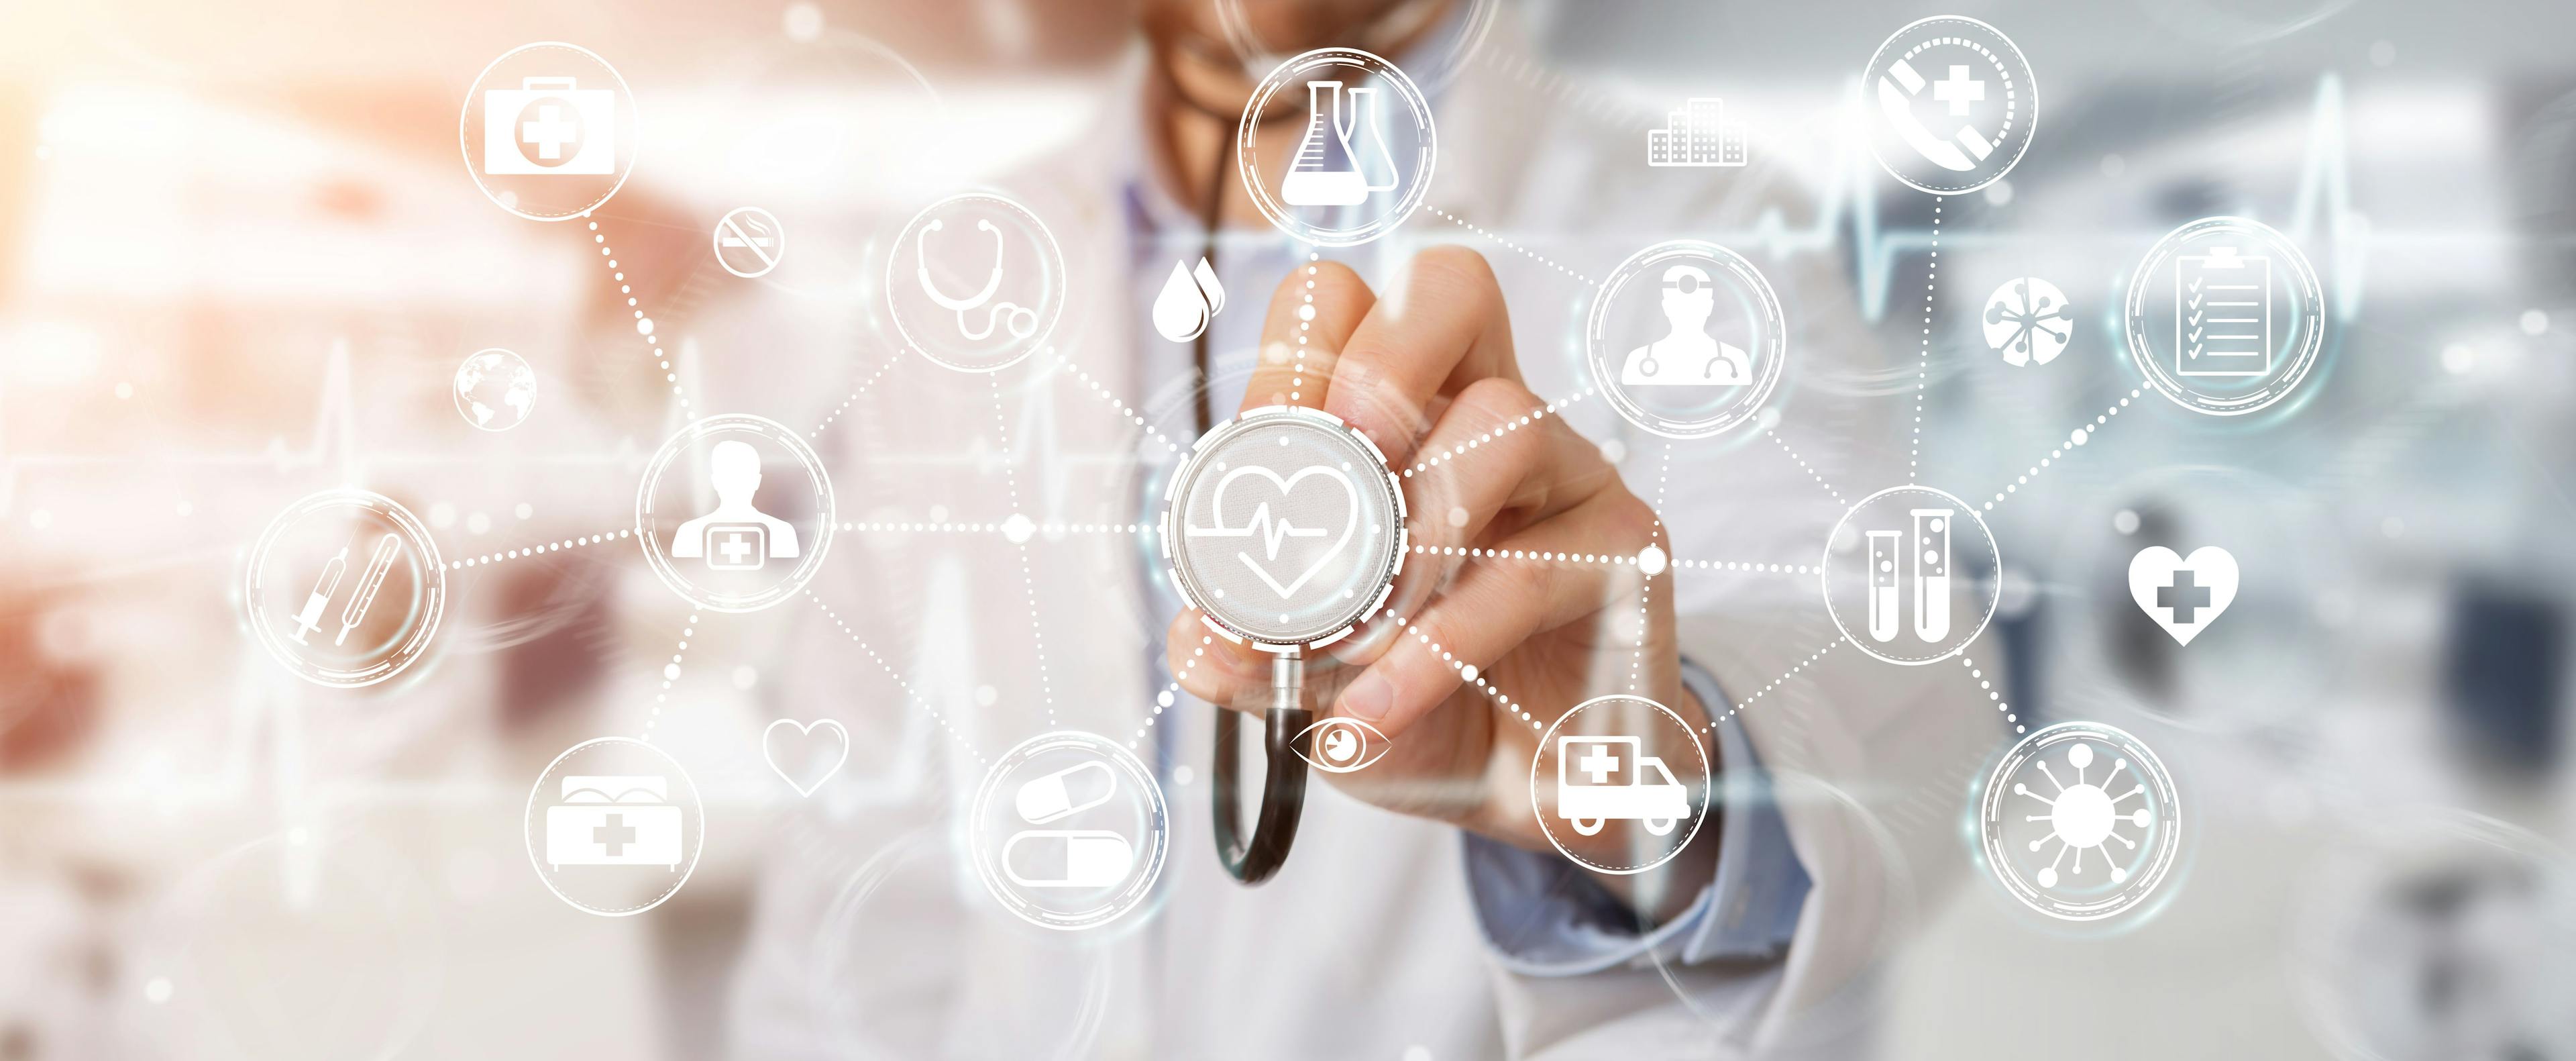 Closing the Gap With Virtual Care Services: Reimagining the Delivery of Healthcare